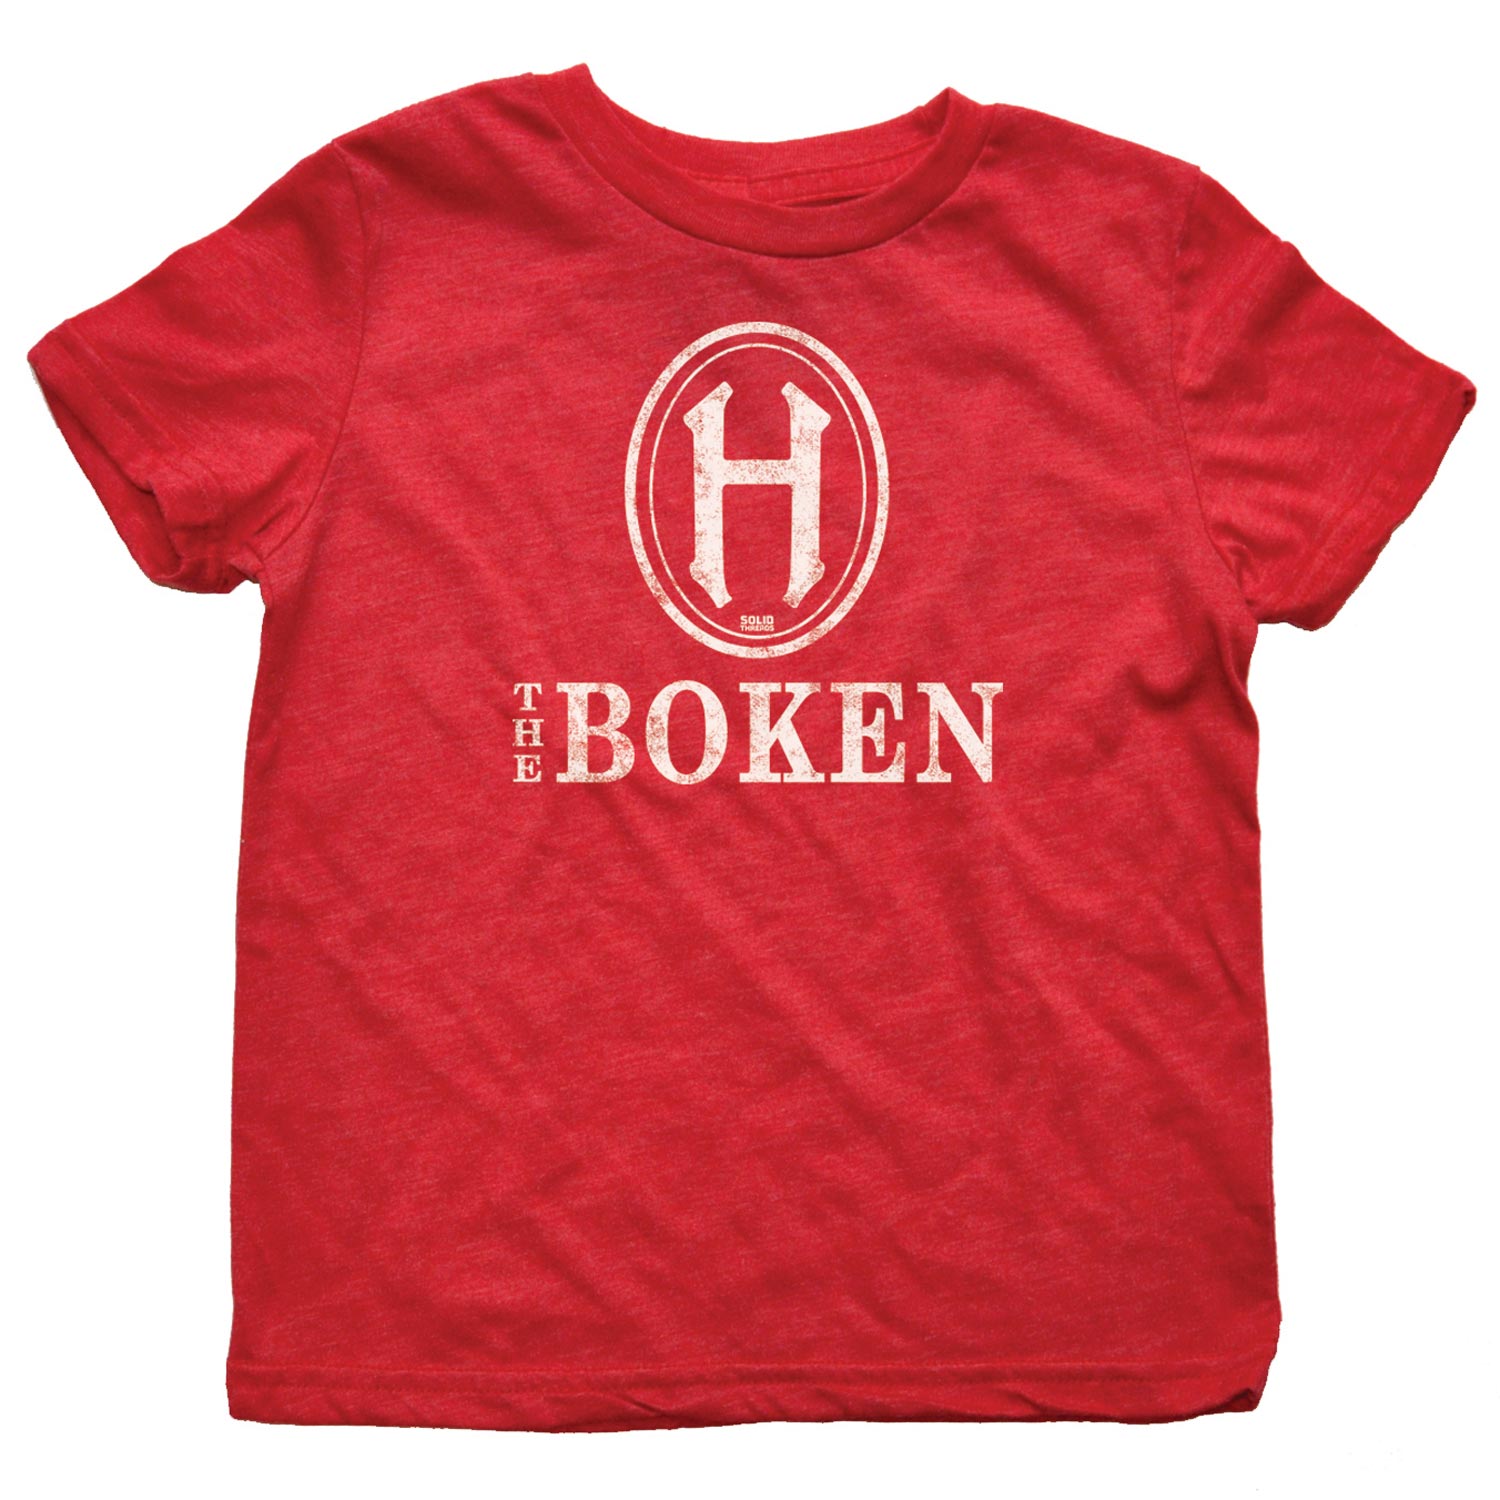 Kids The Boken Cool New Jersey Graphic T-Shirt | Cute Retro Garden State Blue Tee | Solid Threads